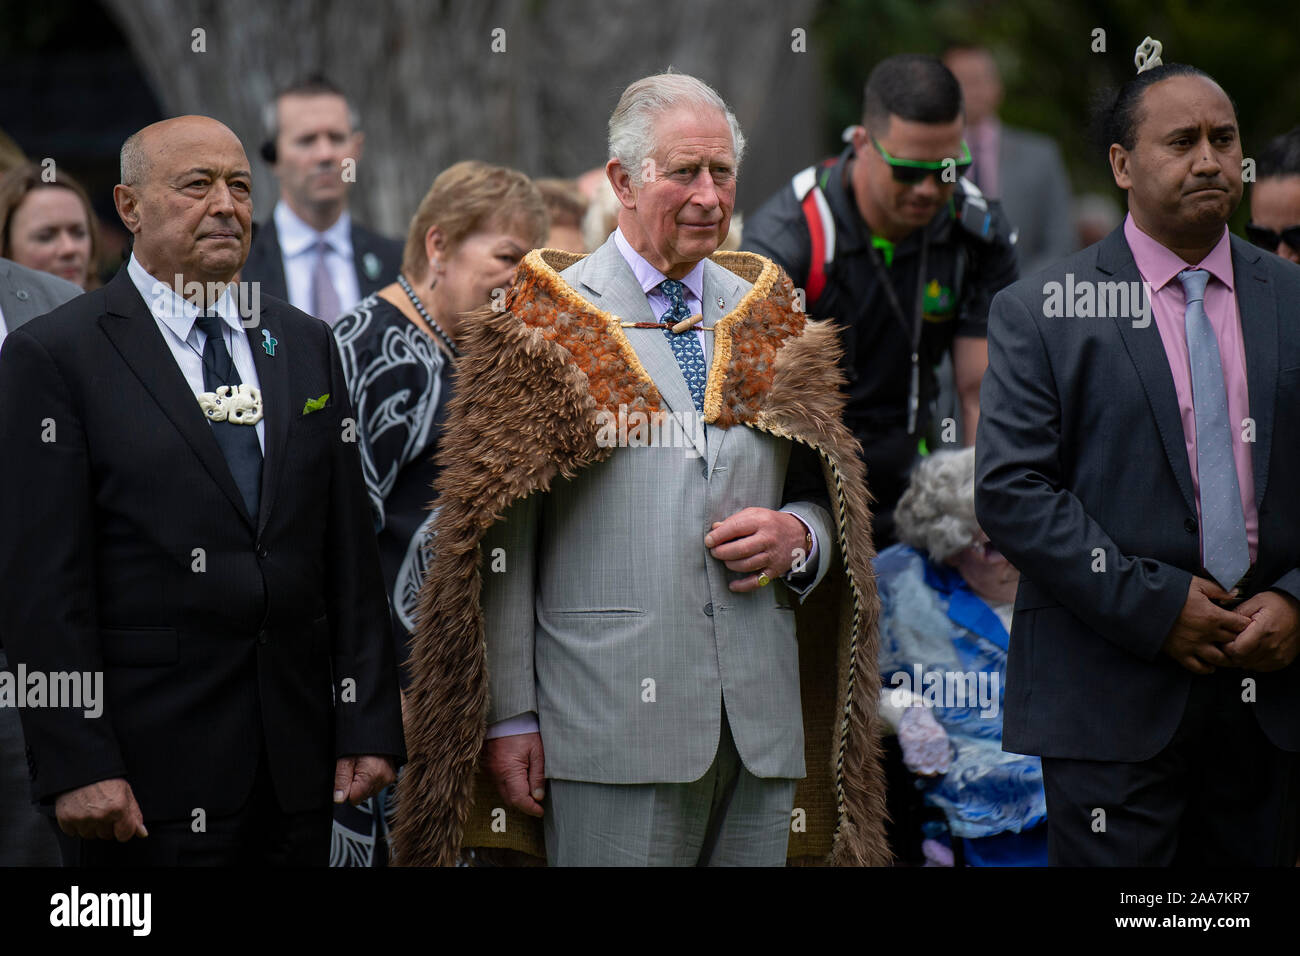 The Prince of Wales watching a powhiri, a Maori welcoming ceremony, during a visit to Waitangi Treaty Grounds, the Bay of Islands, on the fourth day of the royal visit to New Zealand. Stock Photo